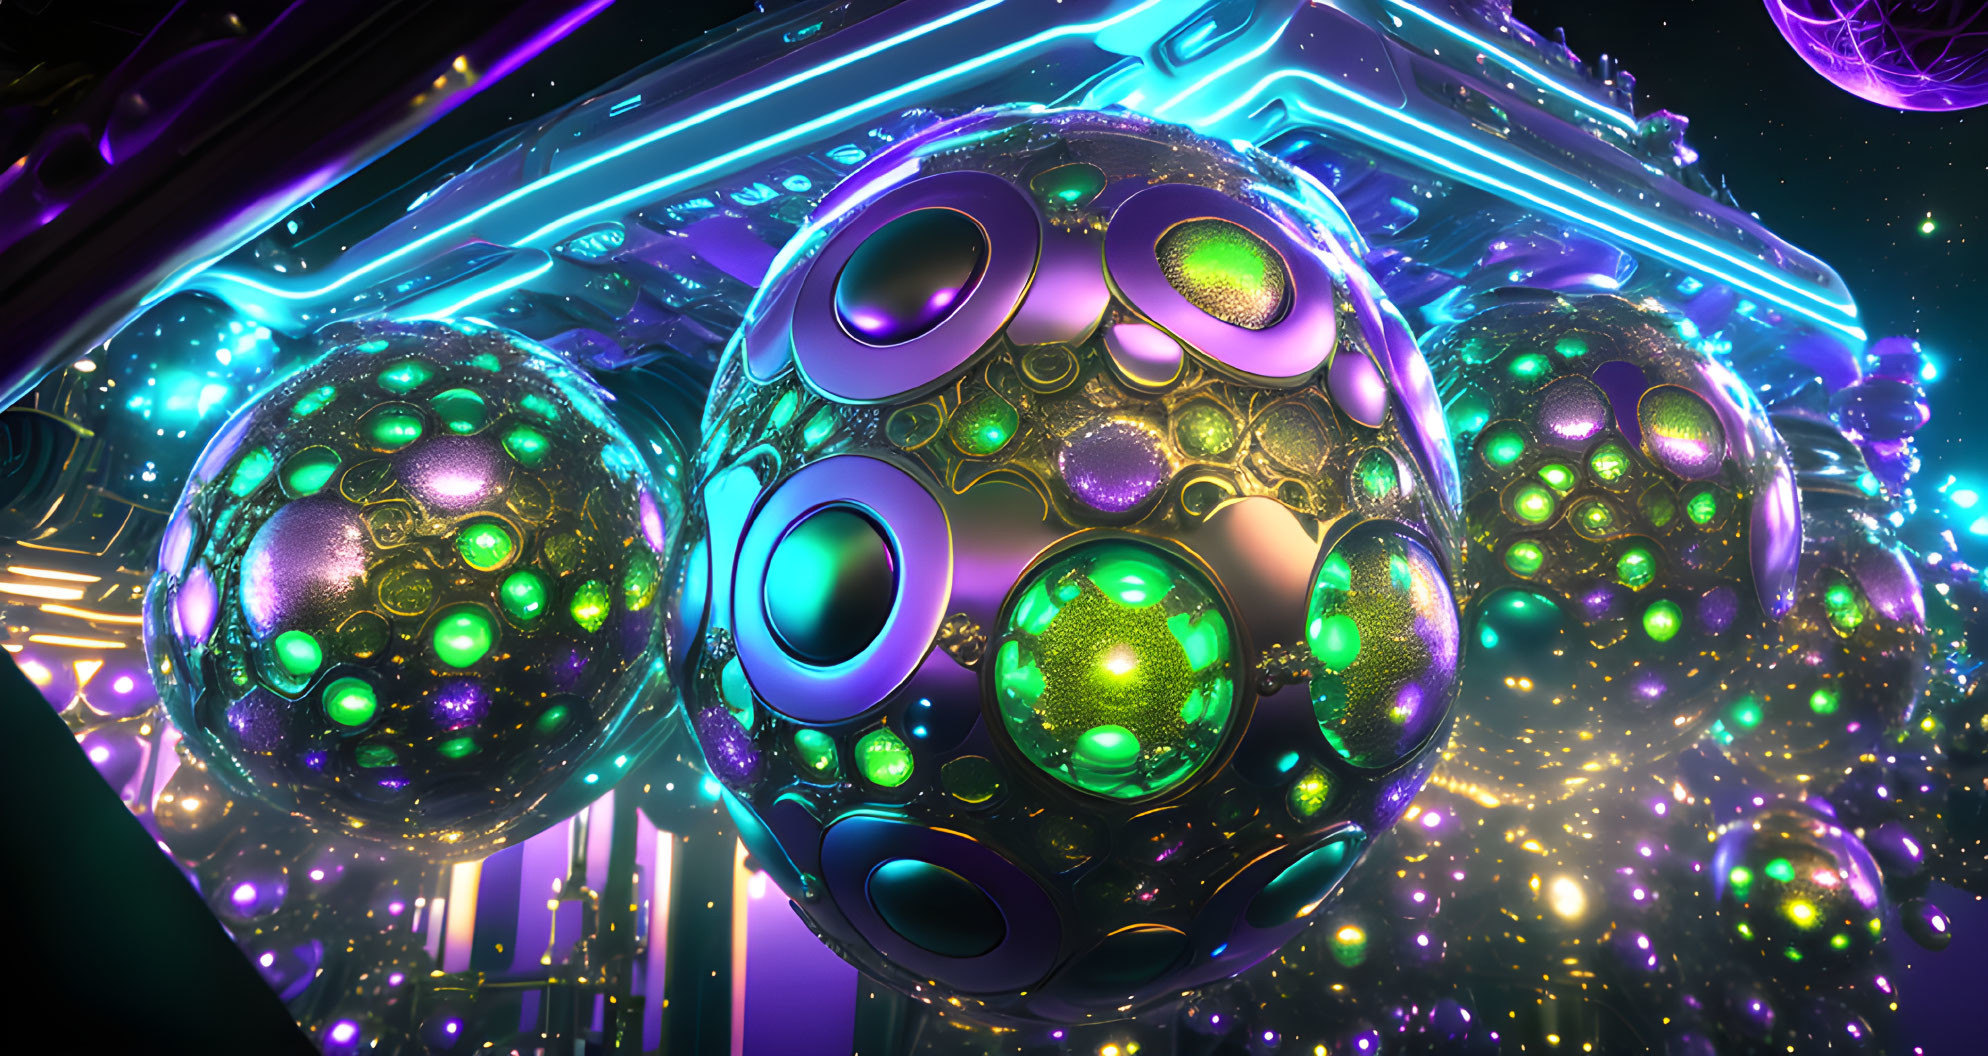 Glowing orbs with intricate patterns under neon alien structure